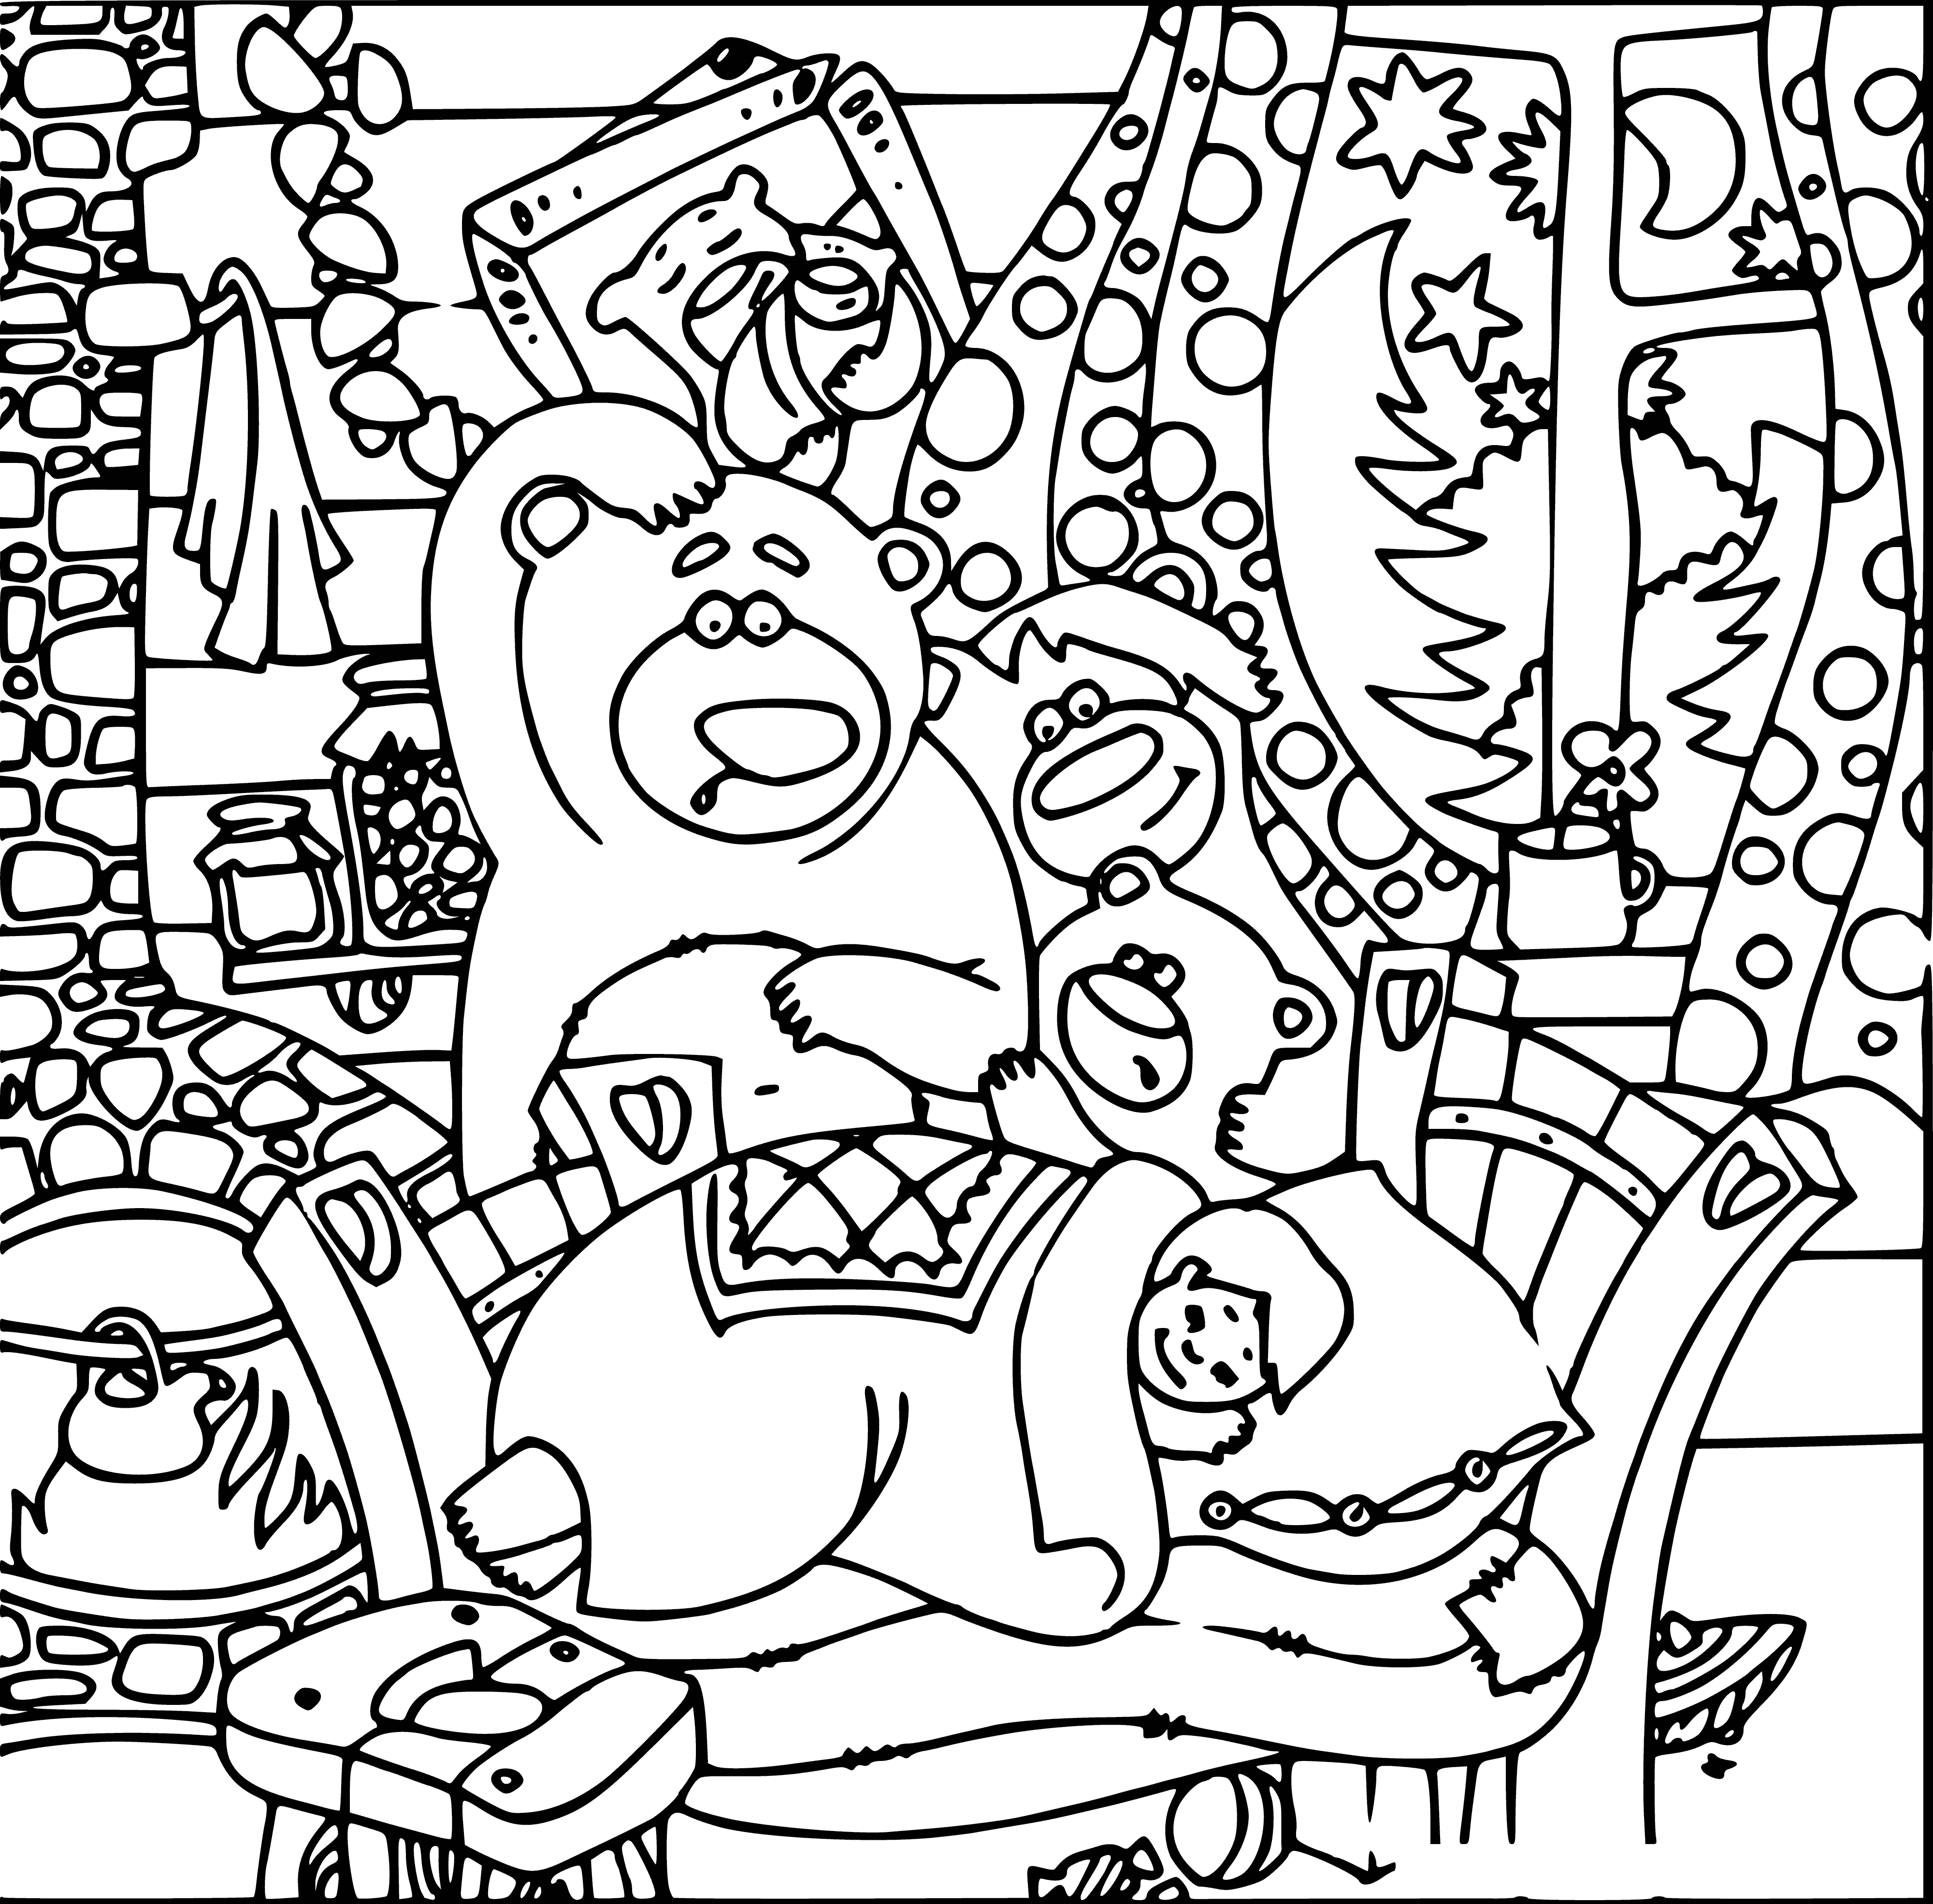 coloring page: Once upon a time three bears lived together in the forest and went into the house of a little girl. Despite being too big for the chairs & porridge, Baby Bear was just the right size & fell asleep in her bed. The little girl was scared & ran out so the bears also ran away never to return.